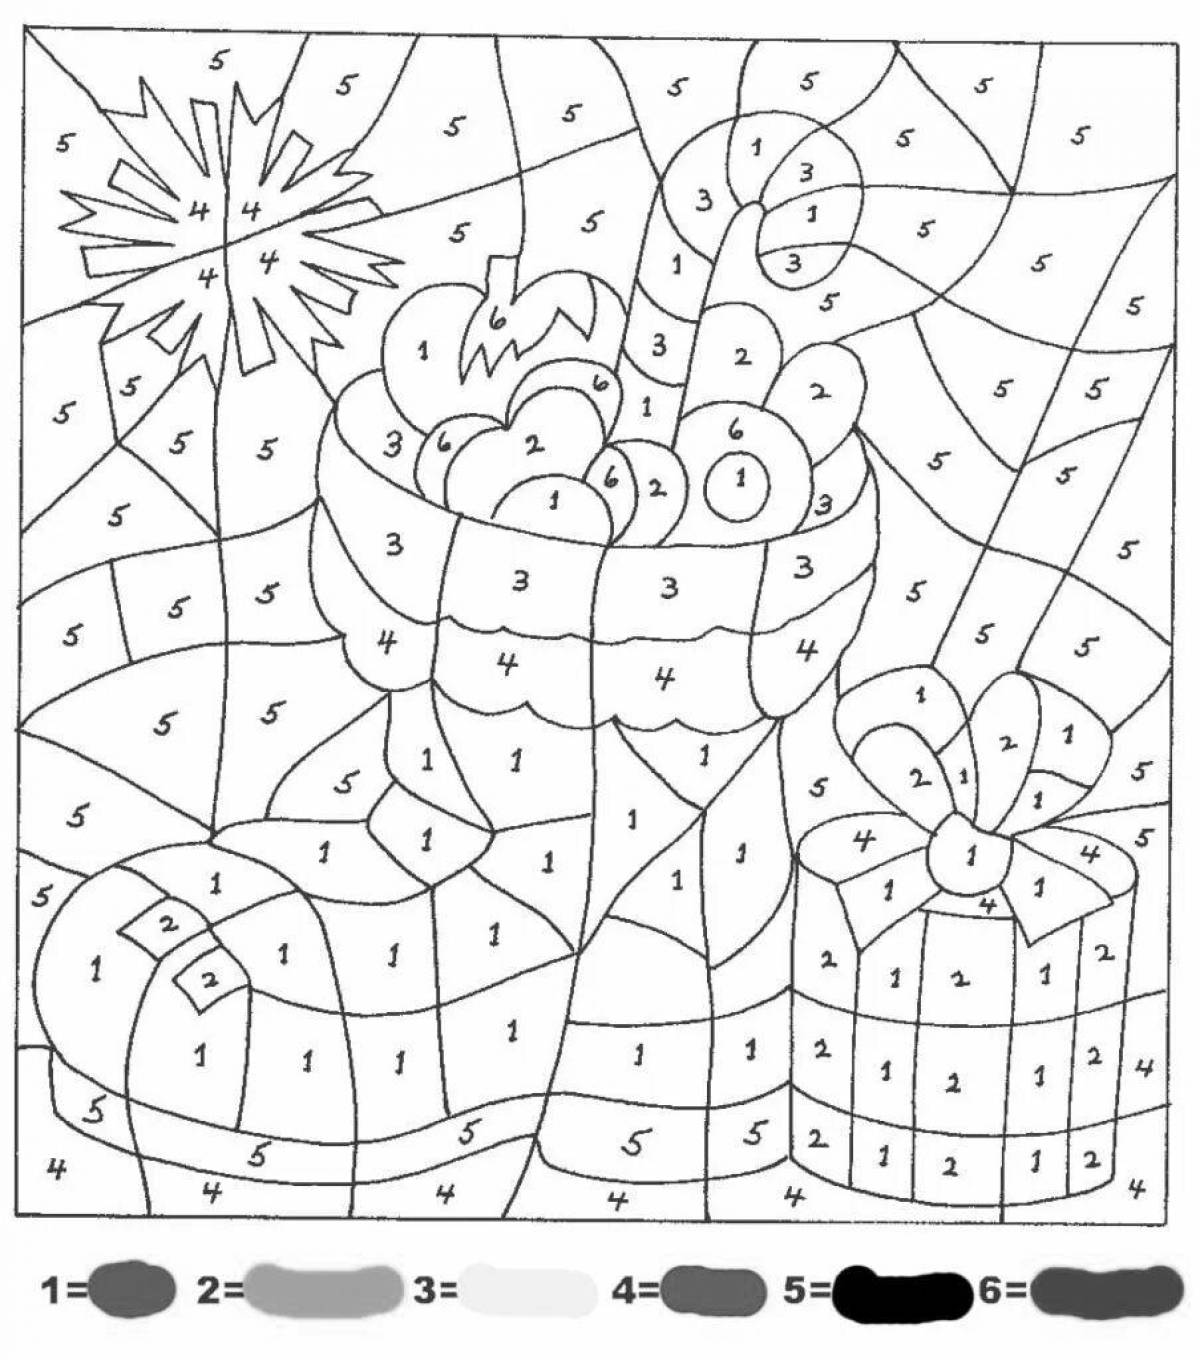 Color crazy tree by numbers coloring book